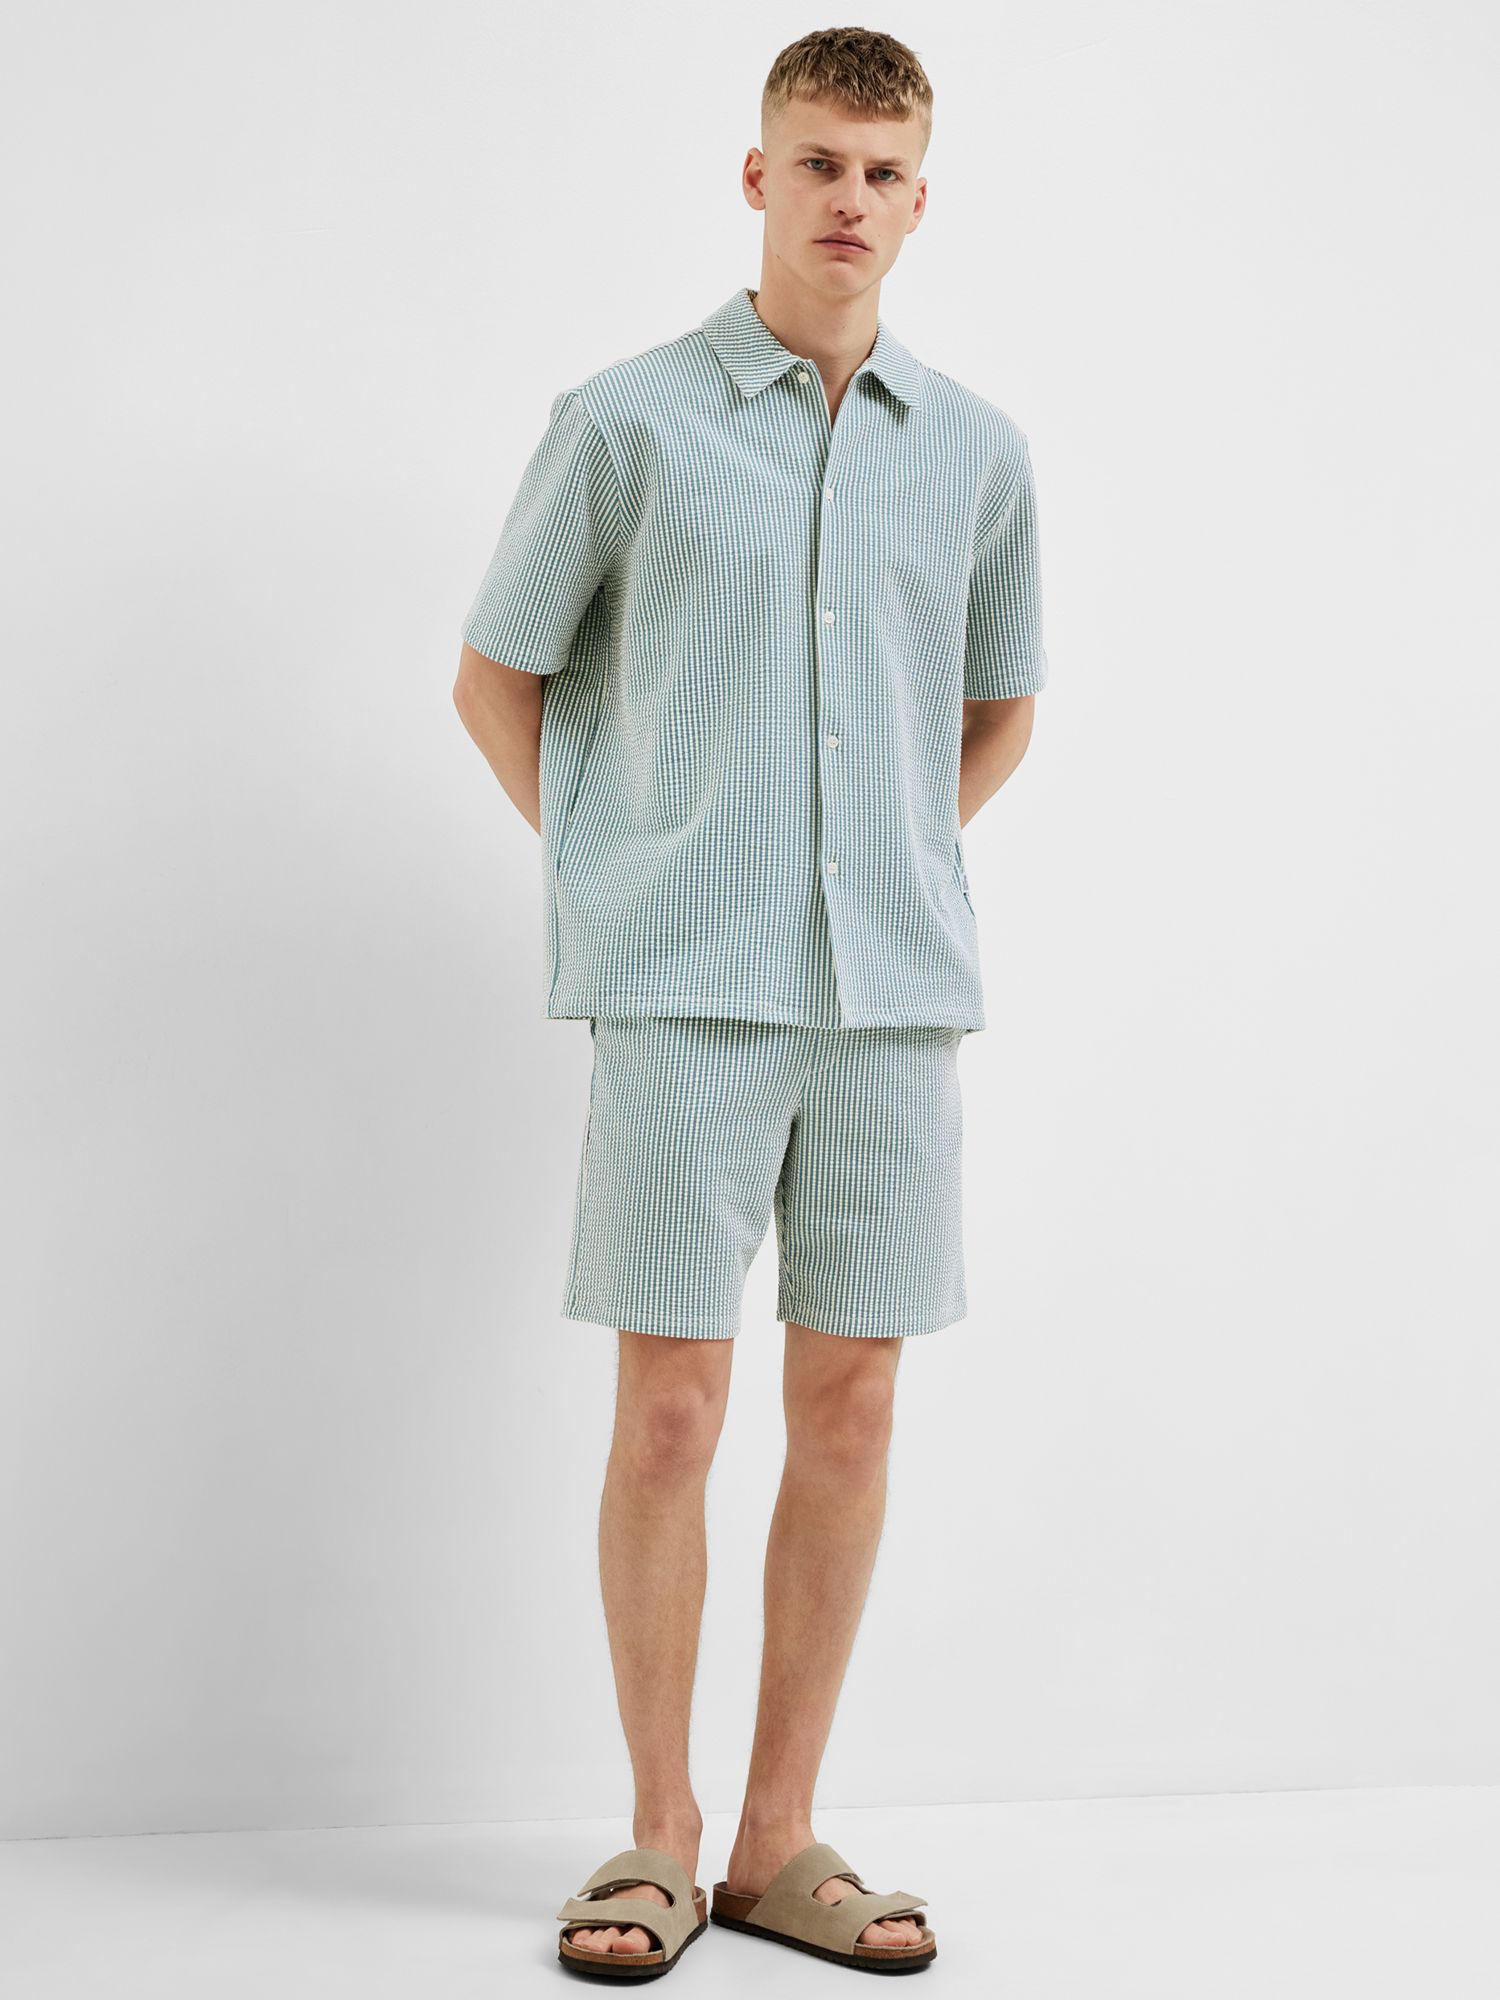 SELECTED HOMME Regular Fit Stripe Shorts, Dragonfly, S